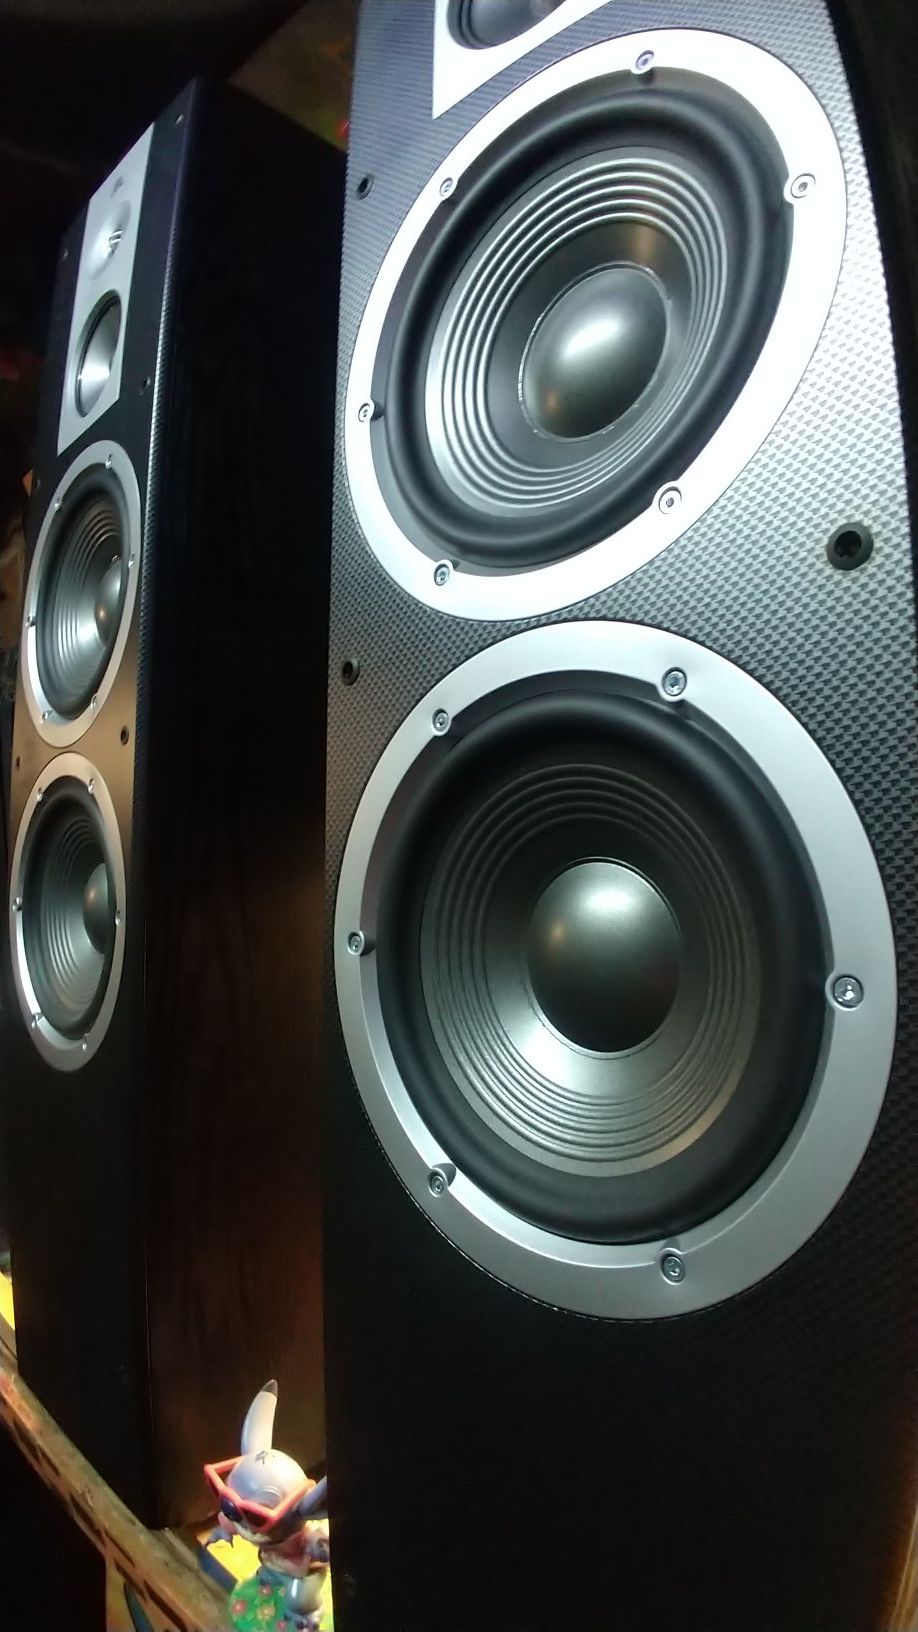 JBL Stadium tower speakers armed with dual bass Makin 8 inch drivers